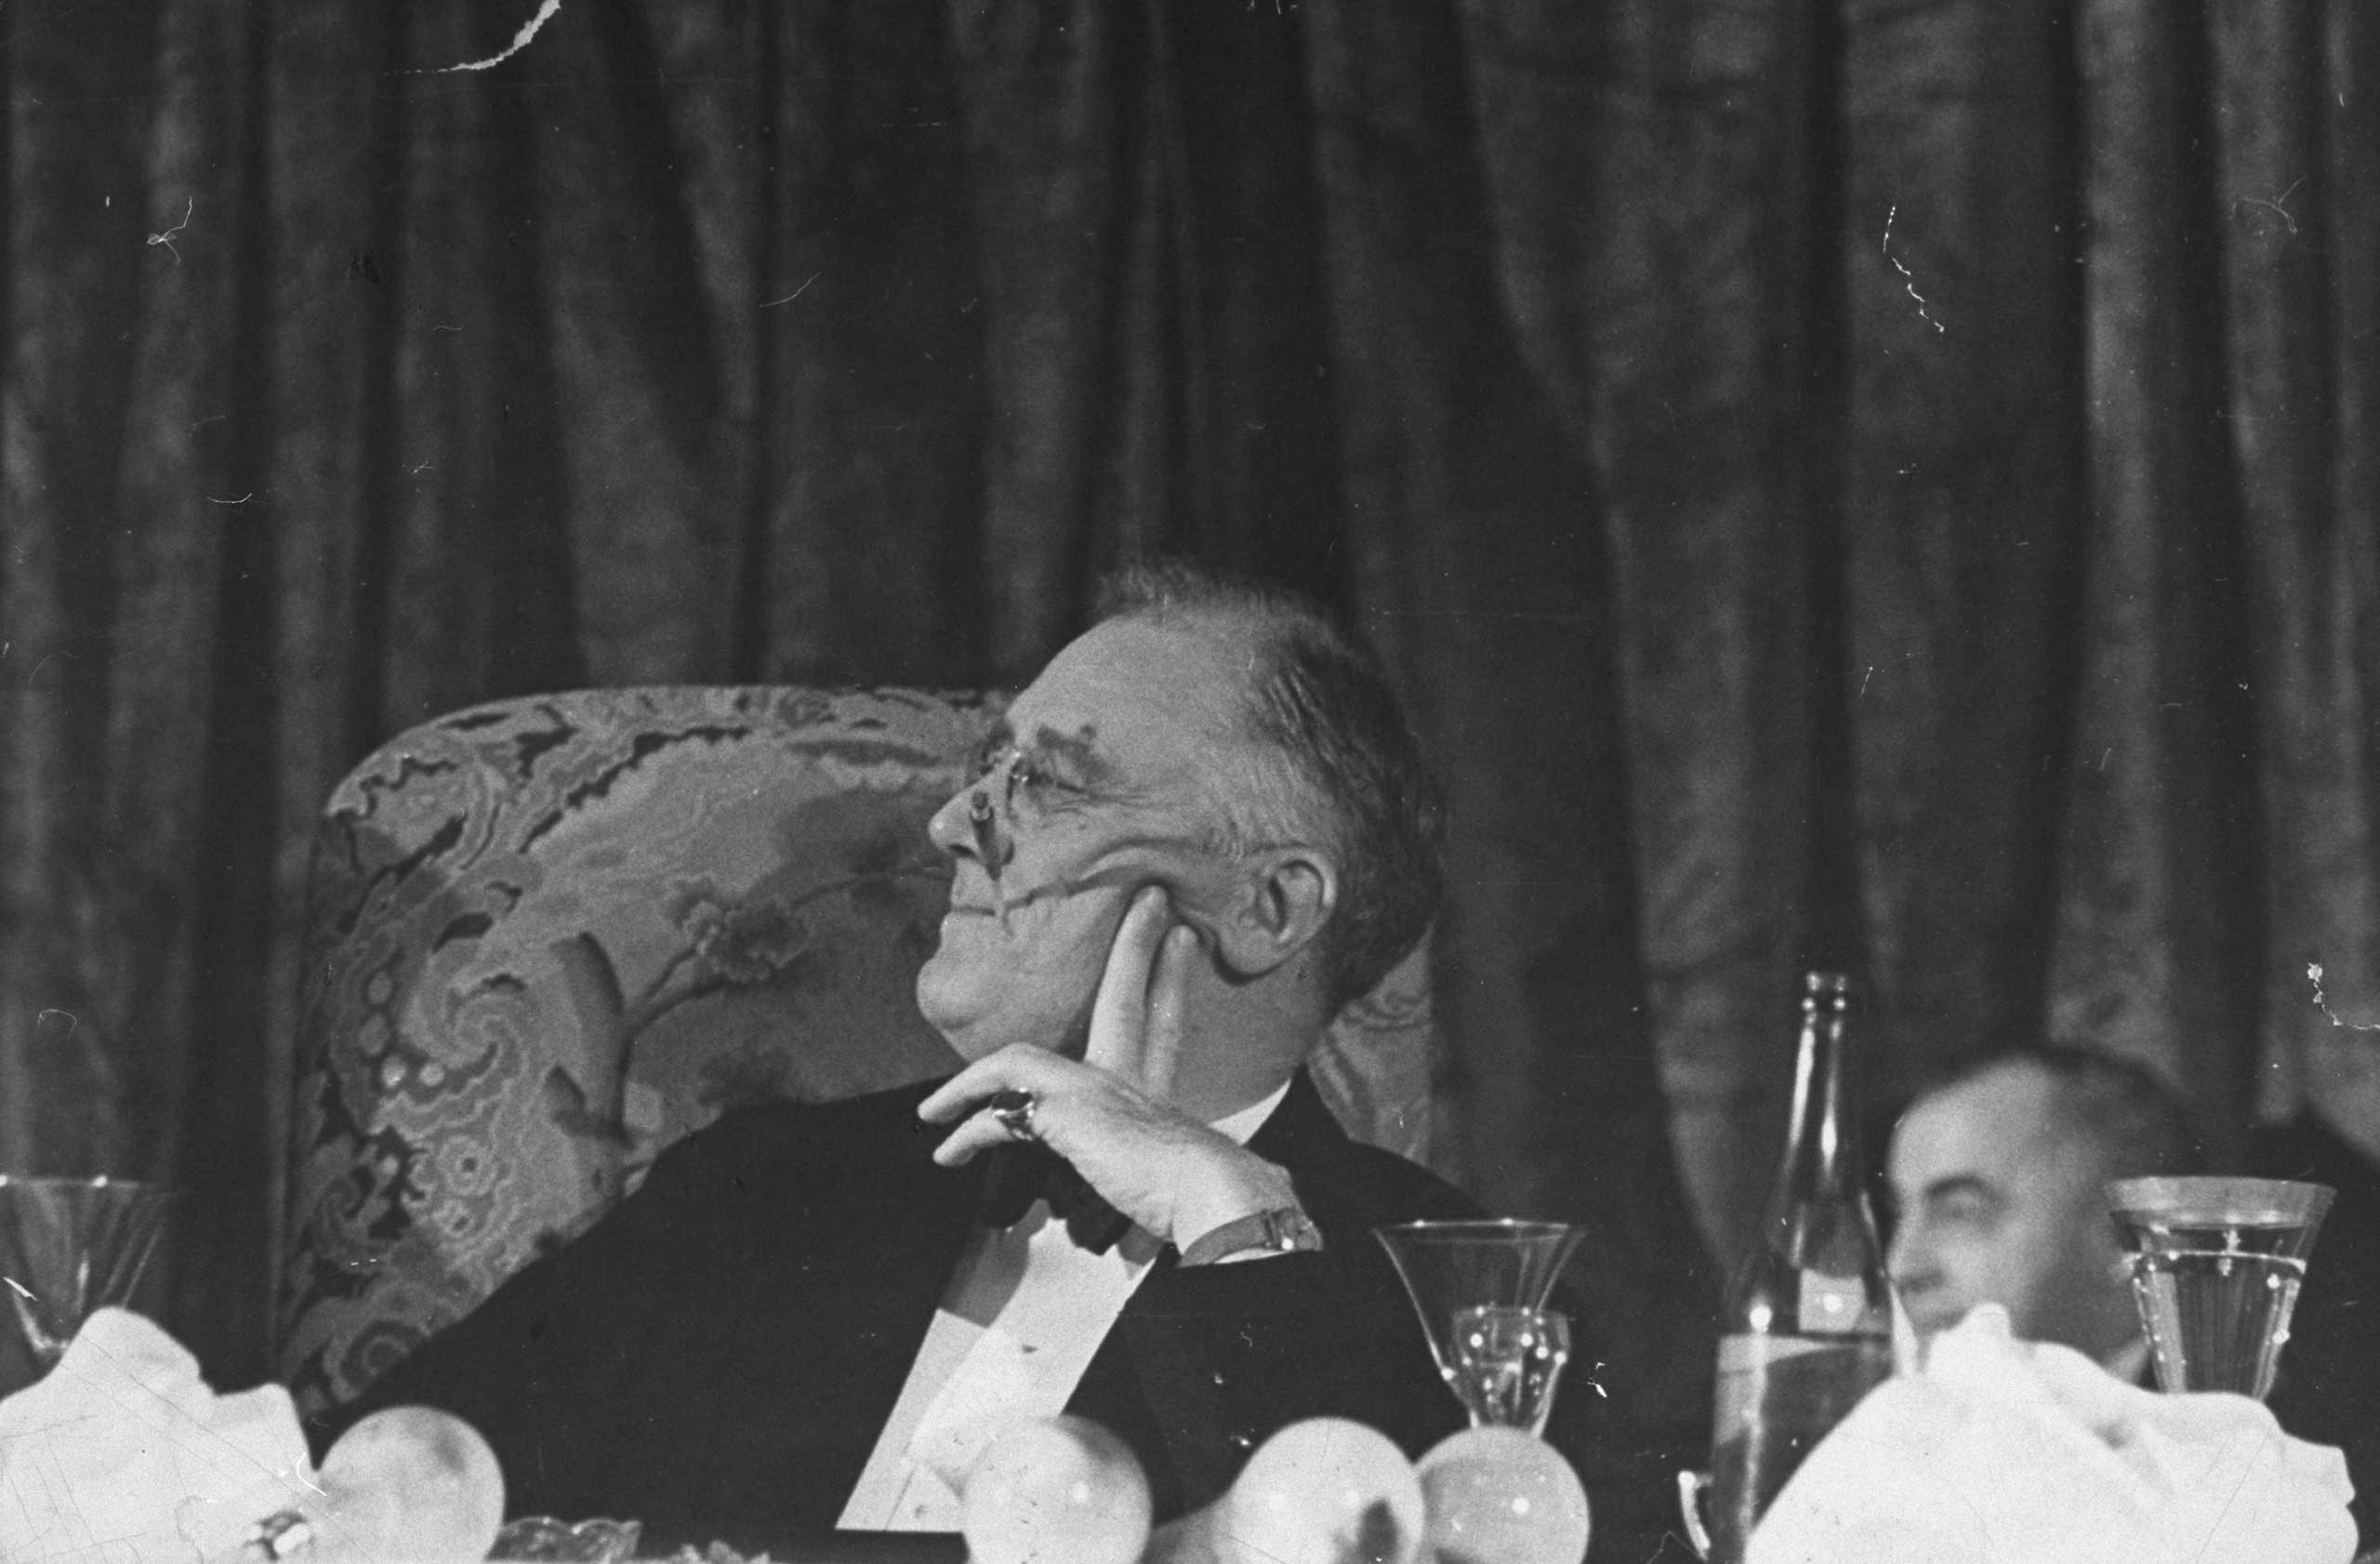 1938 | President Franklin Roosevelt listens to a speech during the annual Jackson Day fundraising dinner in Washington, DC. Originally published in the January 24, 1938, issue of LIFE.